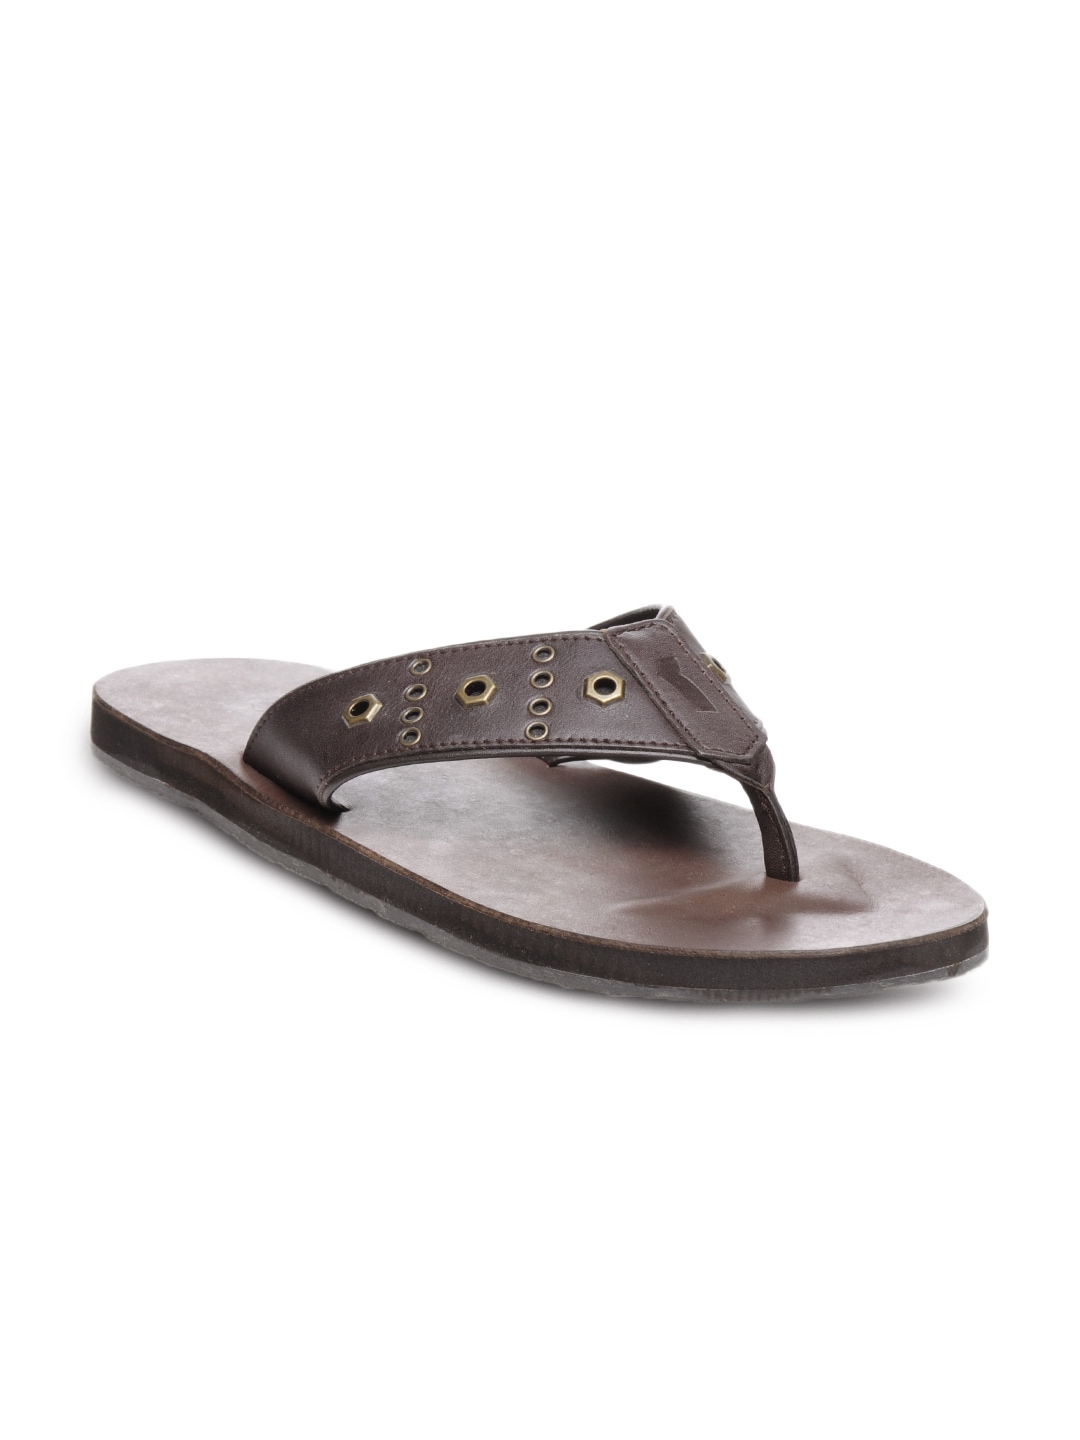 GAS Men Brown Madly Sandals